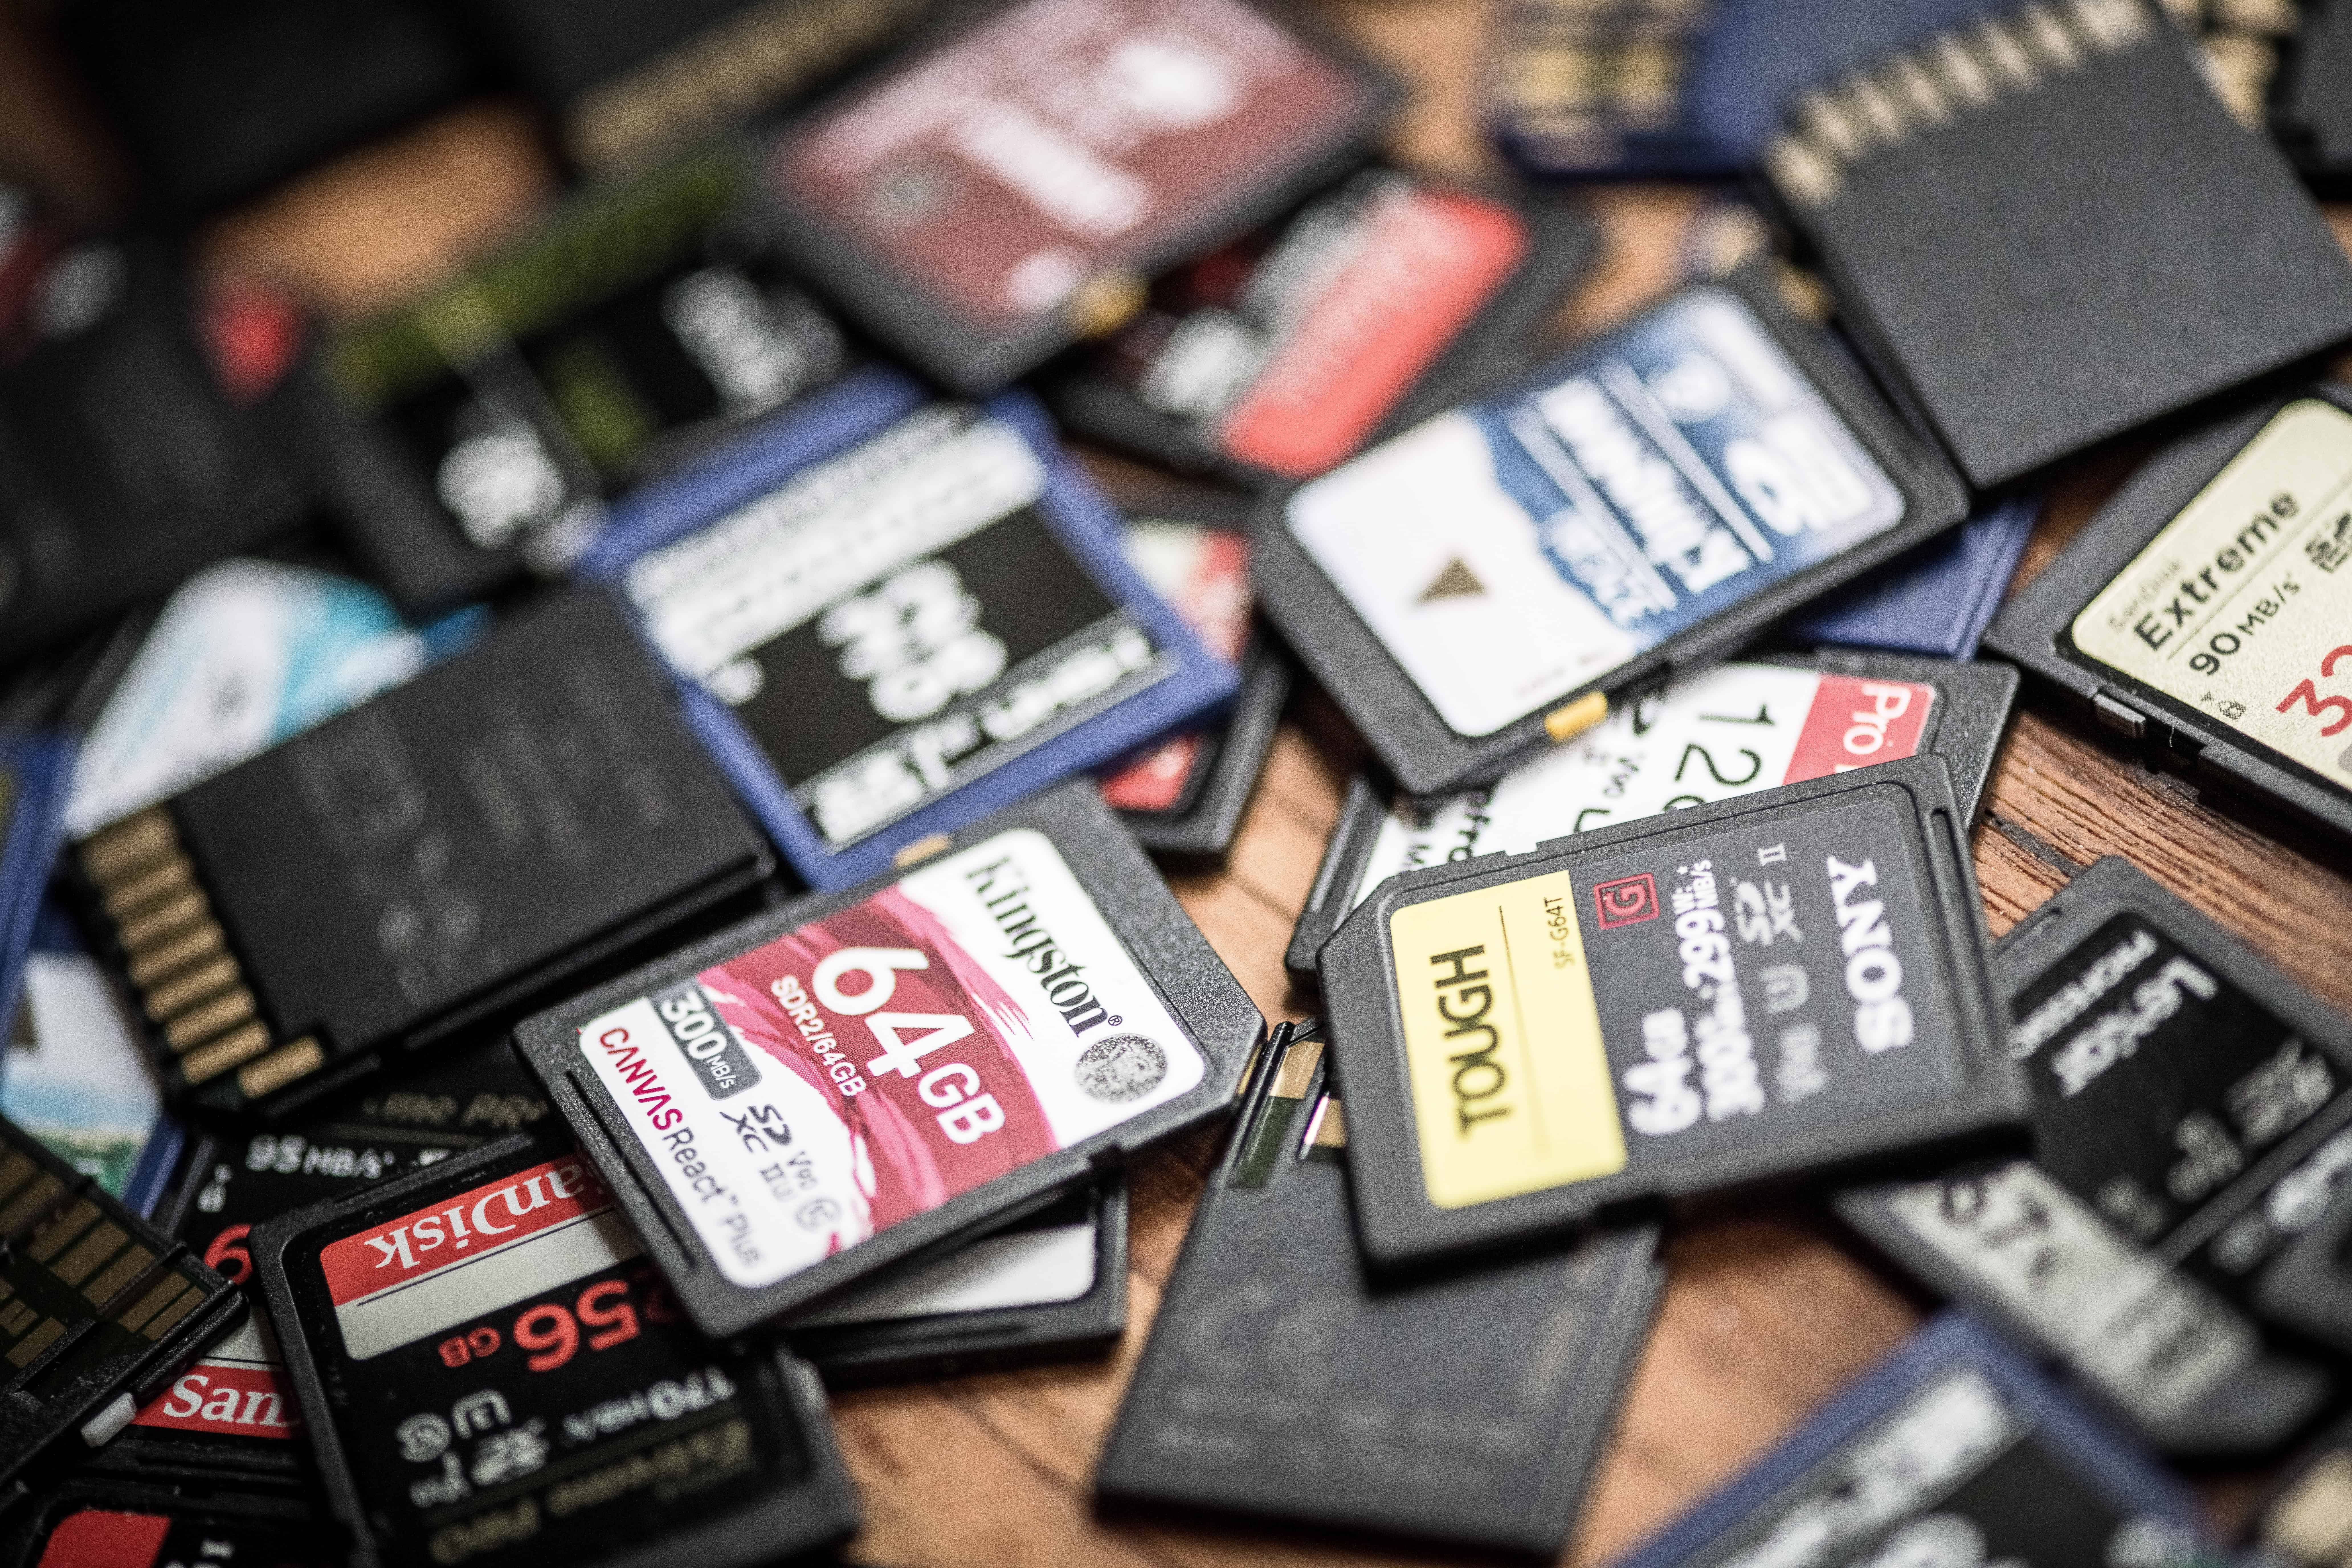 Fastest SD Card Speed Test Results - May 2022